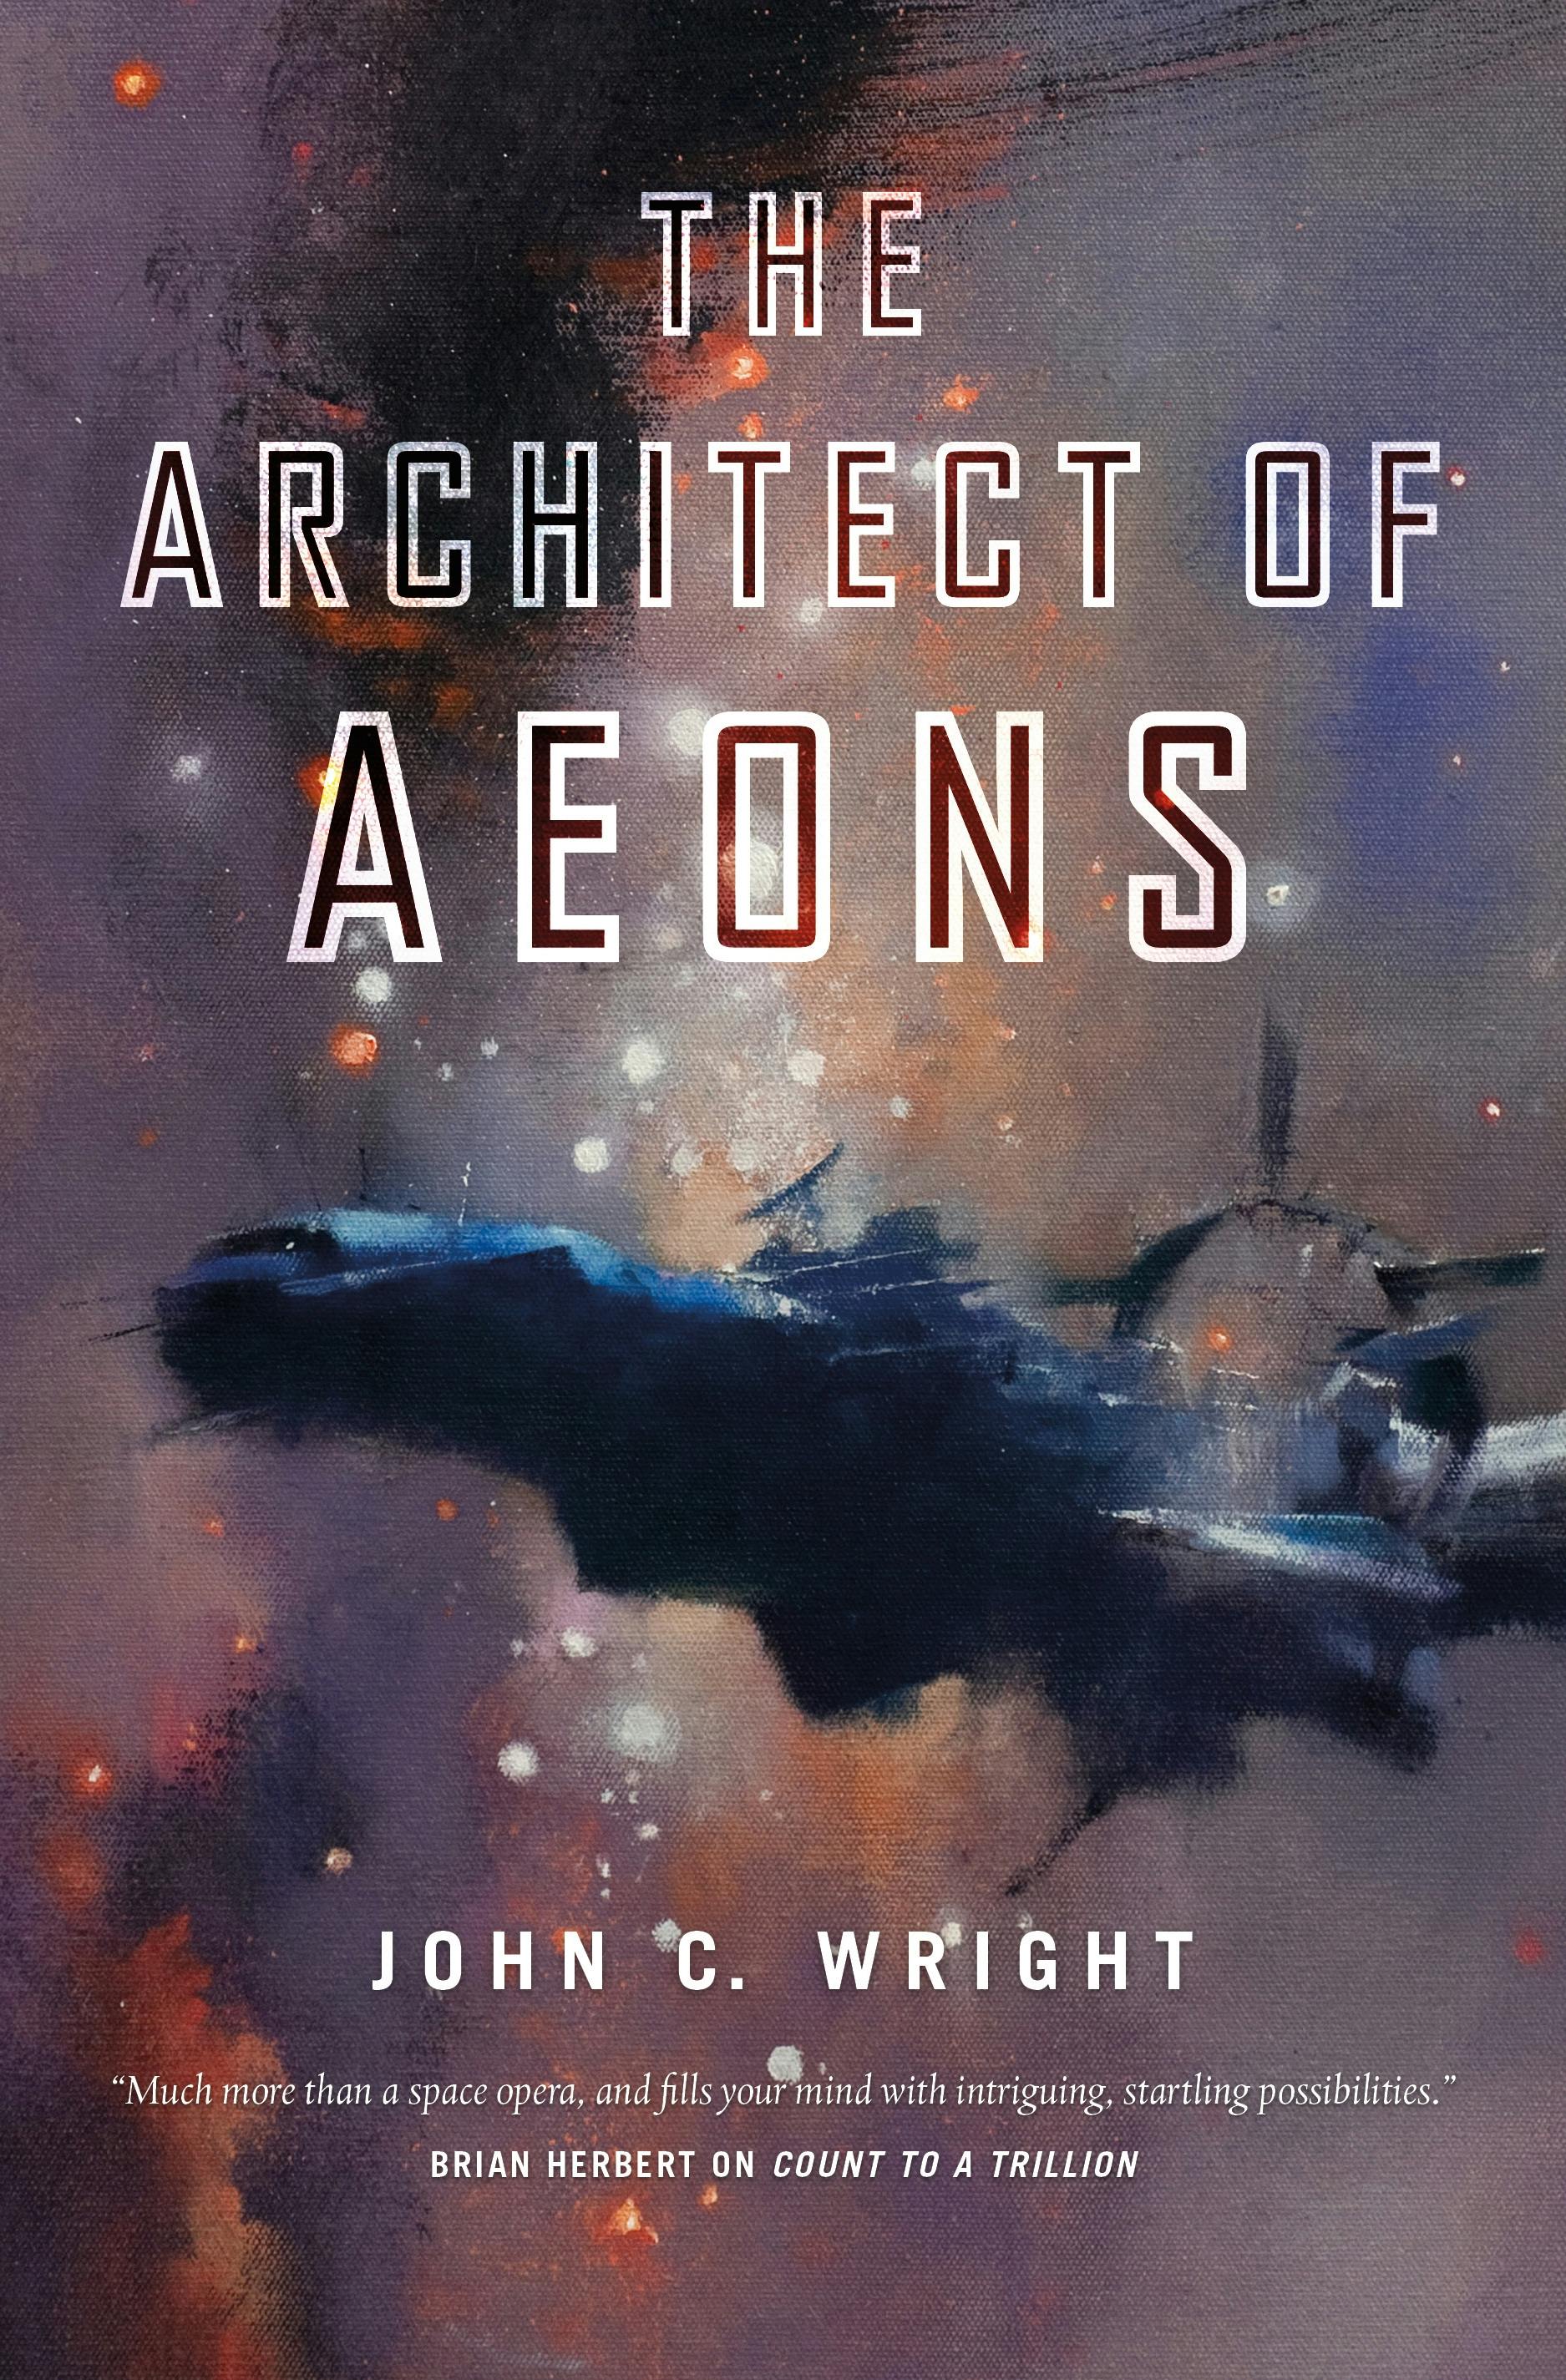 Cover for the book titled as: The Architect of Aeons